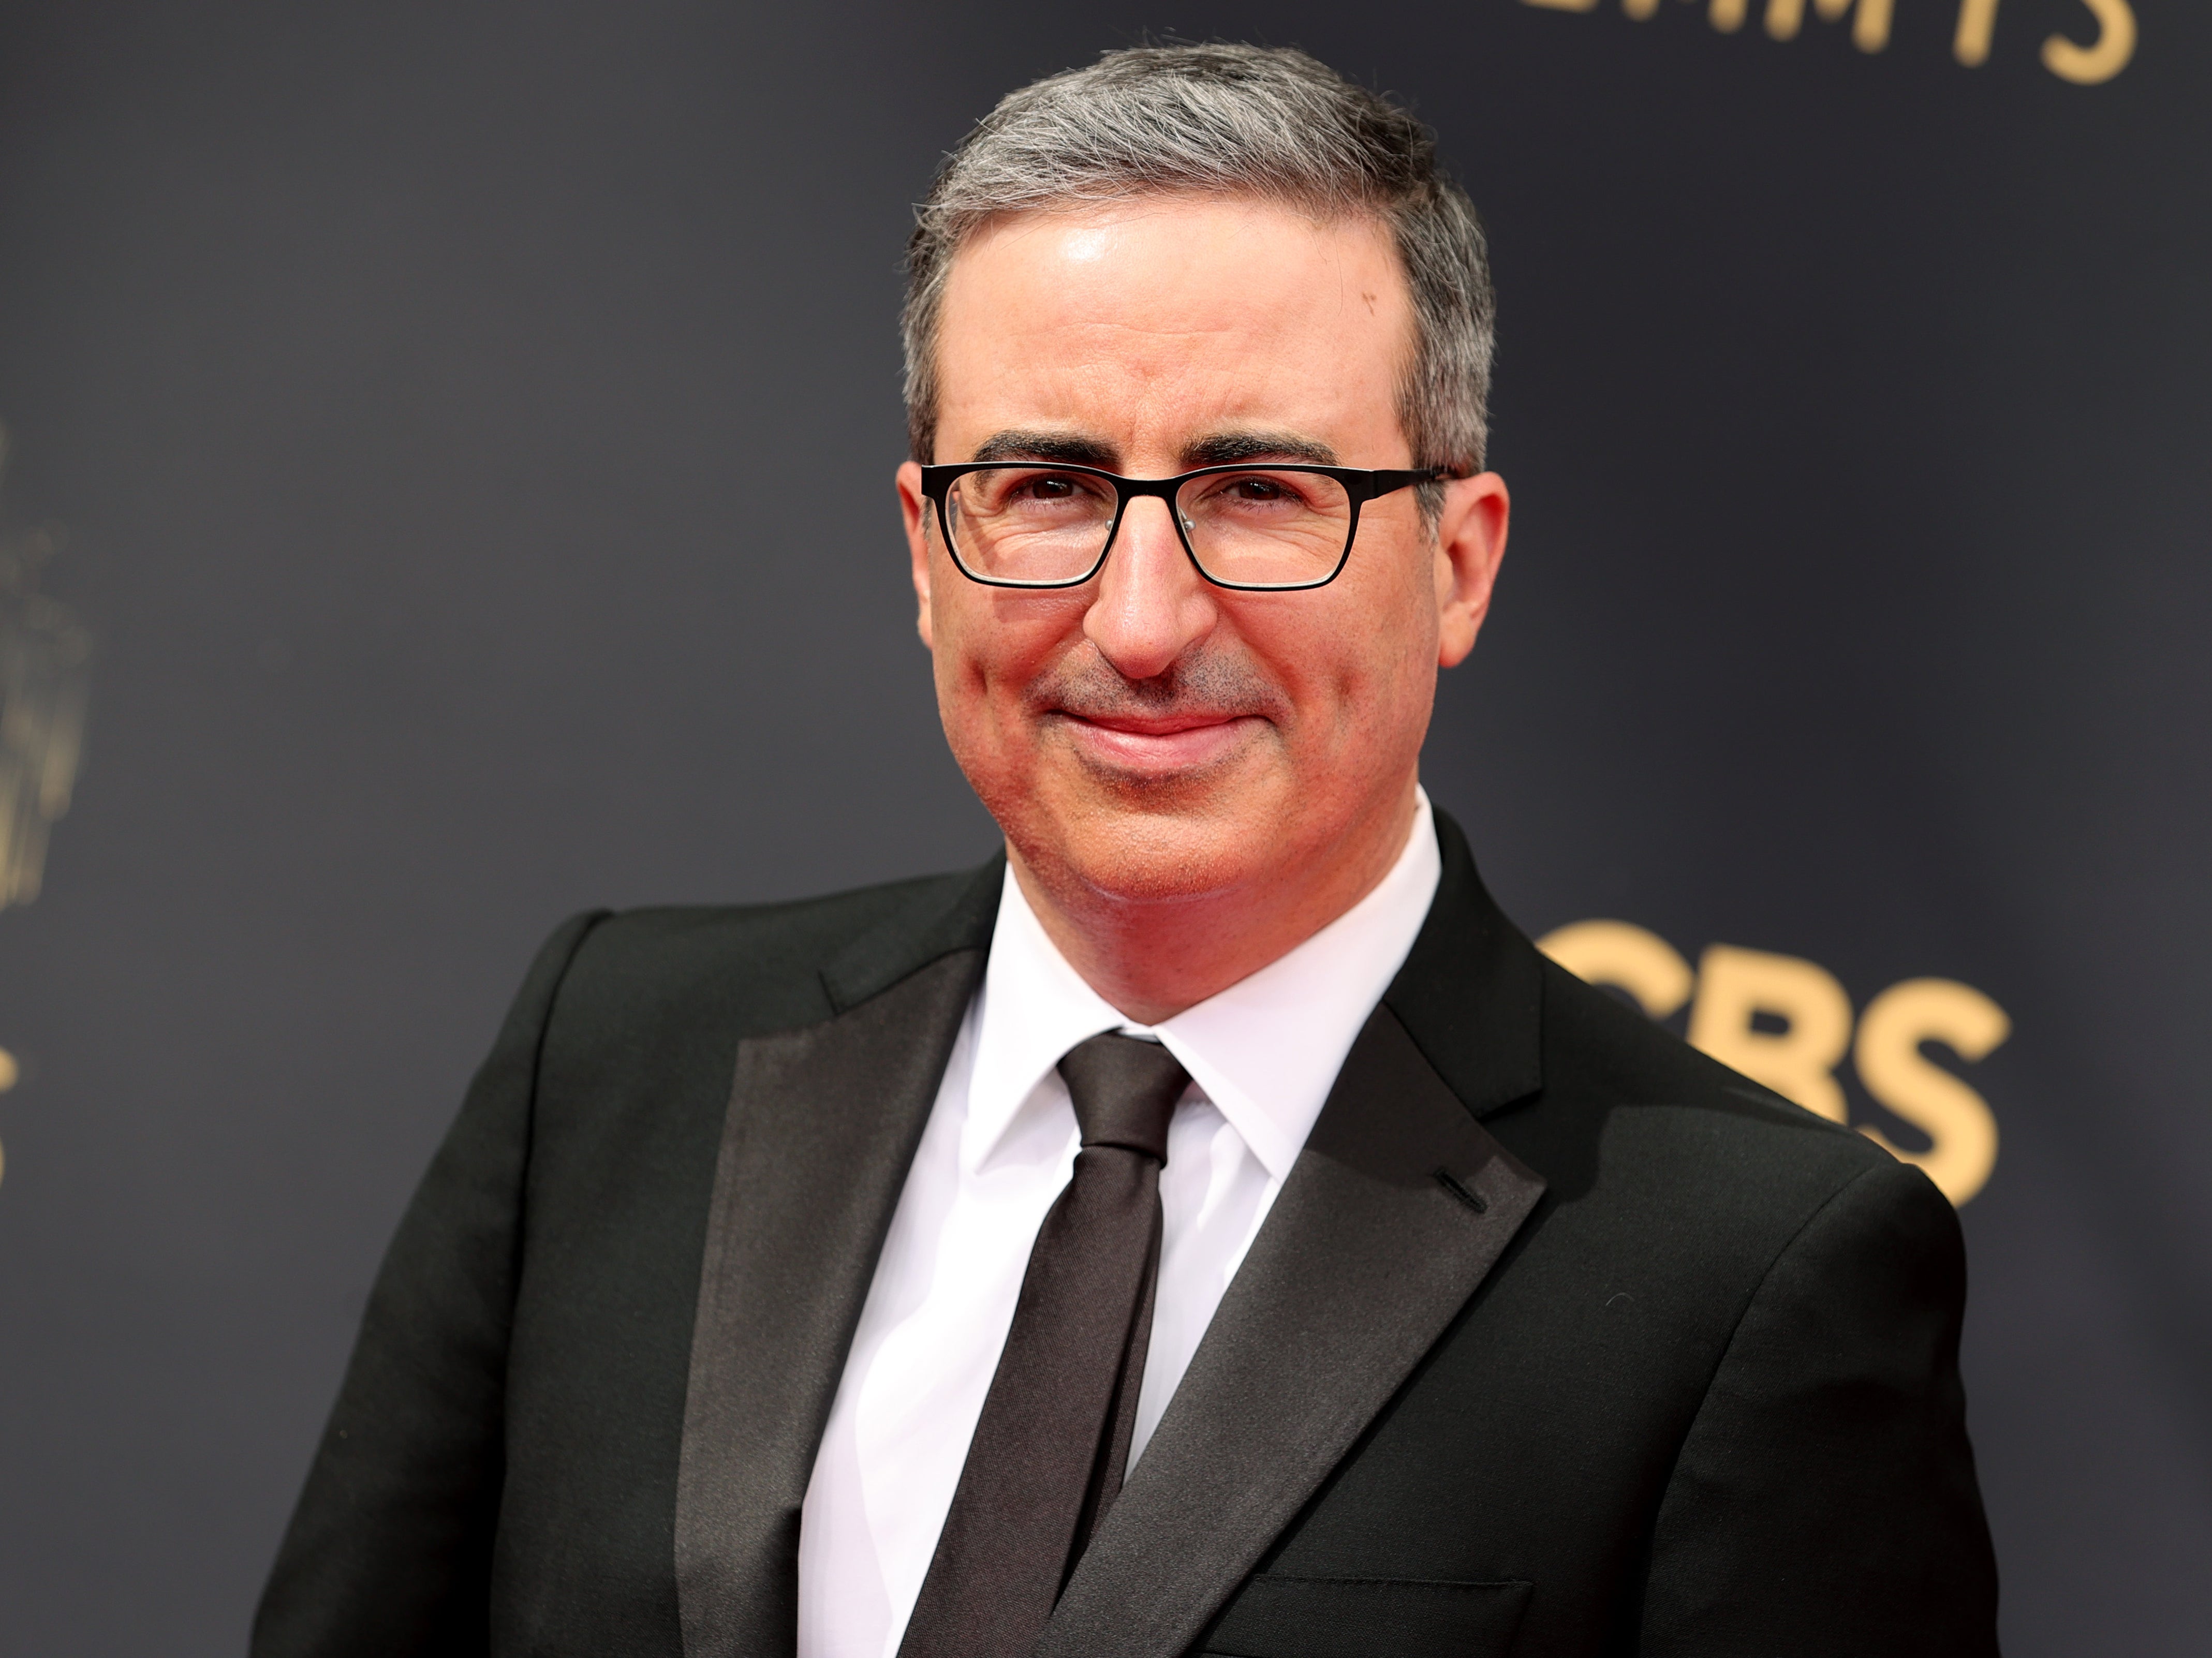 John Oliver has given the judge a chance to receive $1m dollars from himself